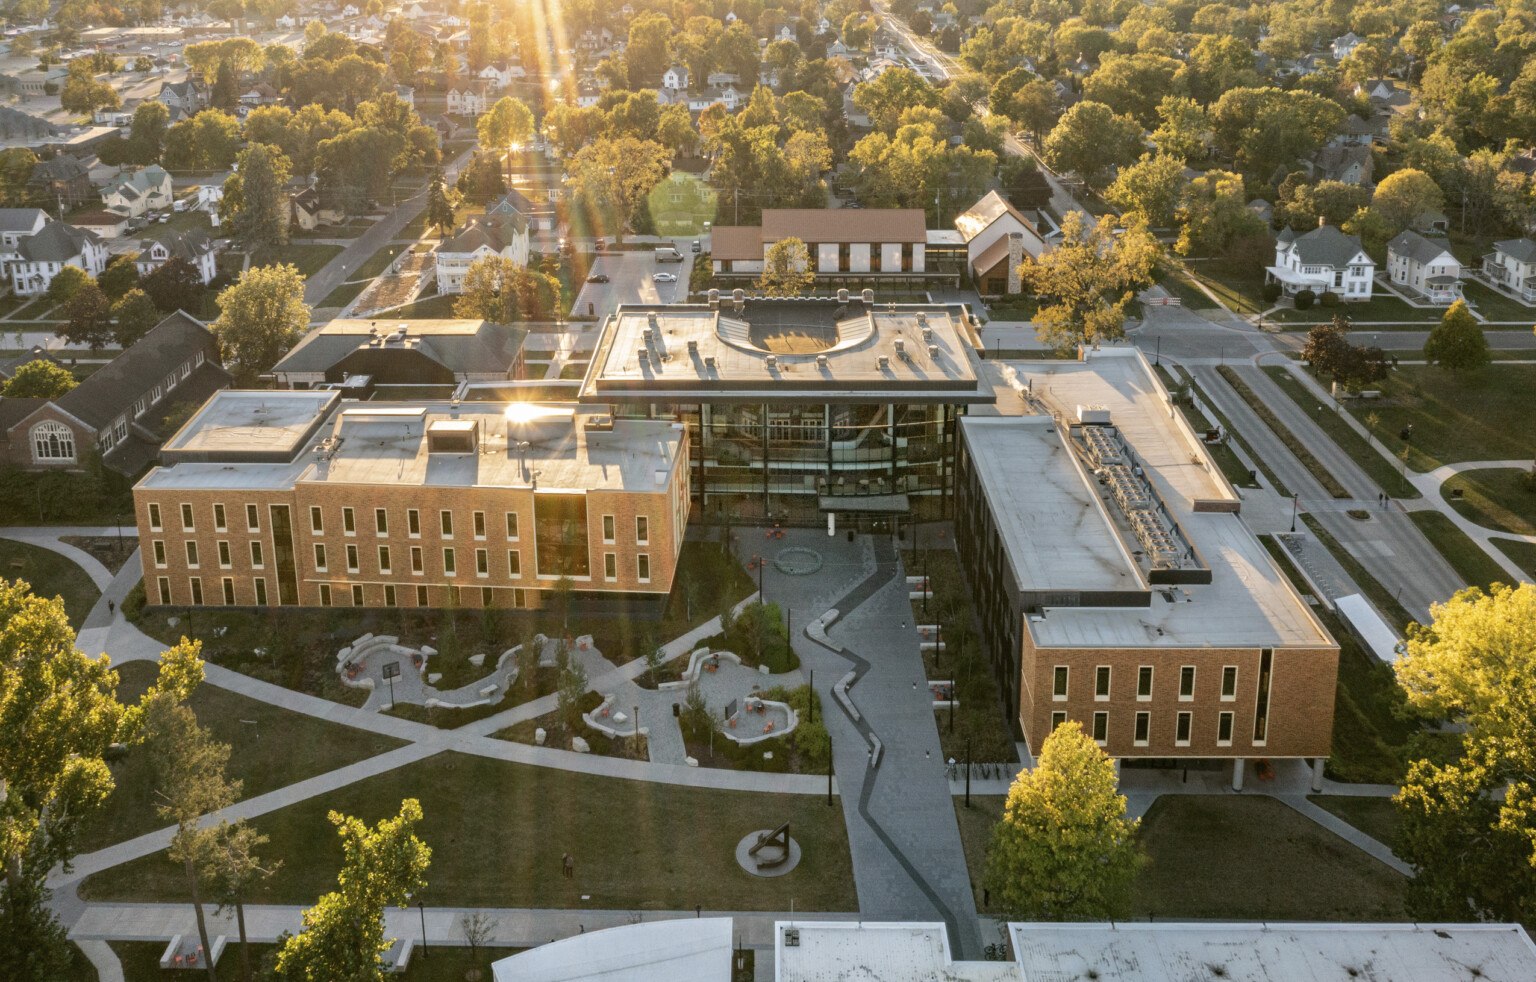 Grinnell College Kington Plaza and Christiansen Outdoor Learning Spaces